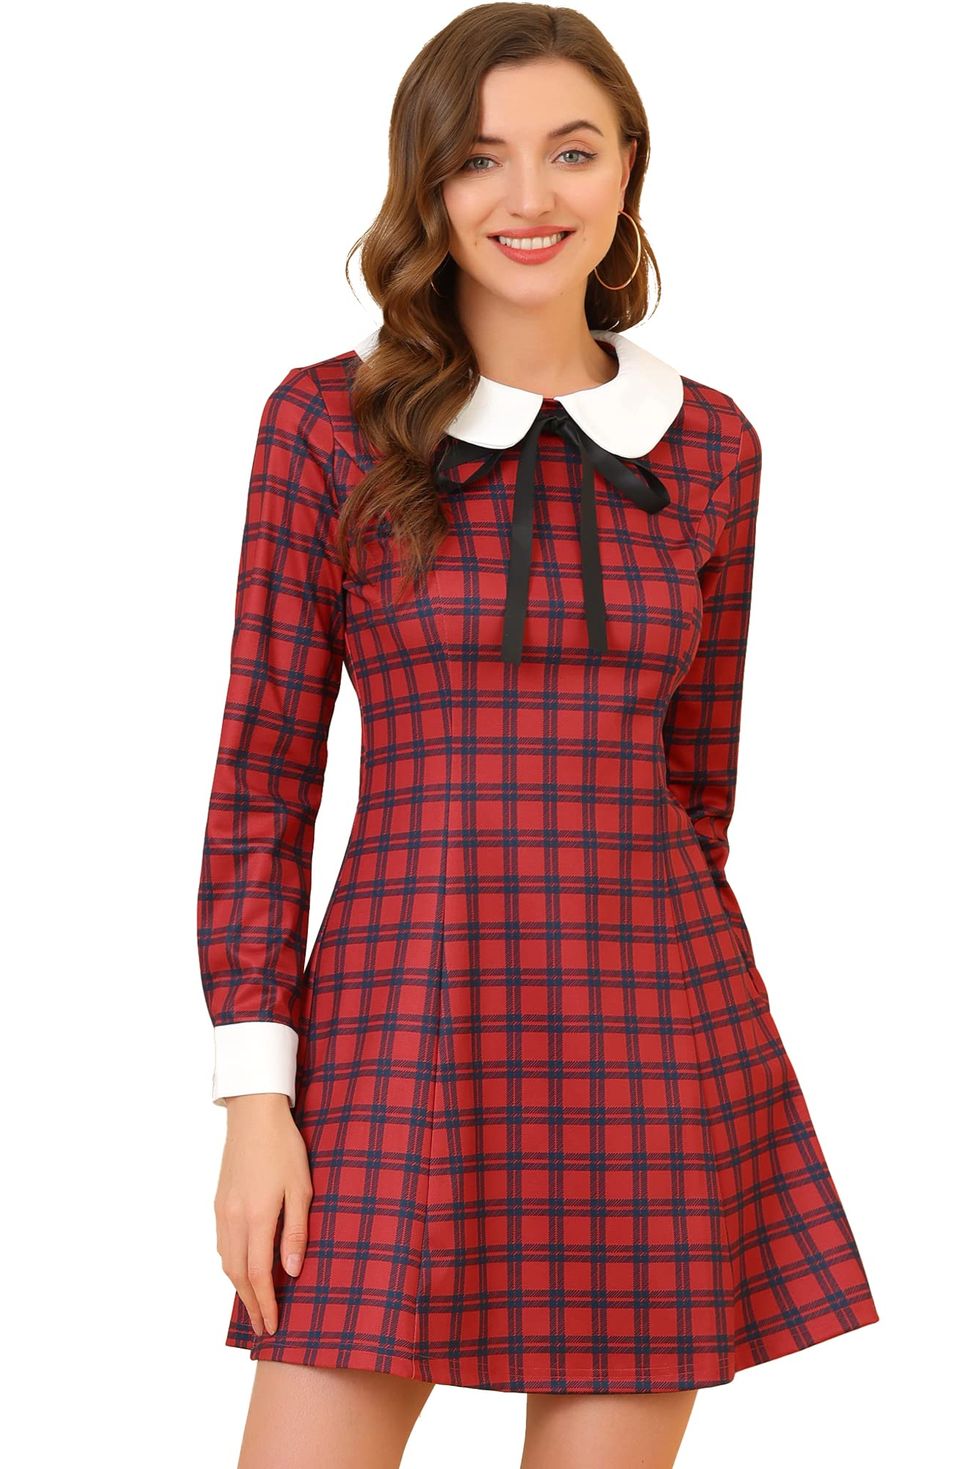 Peter Pan Collar Fit and Flare Plaid Dress